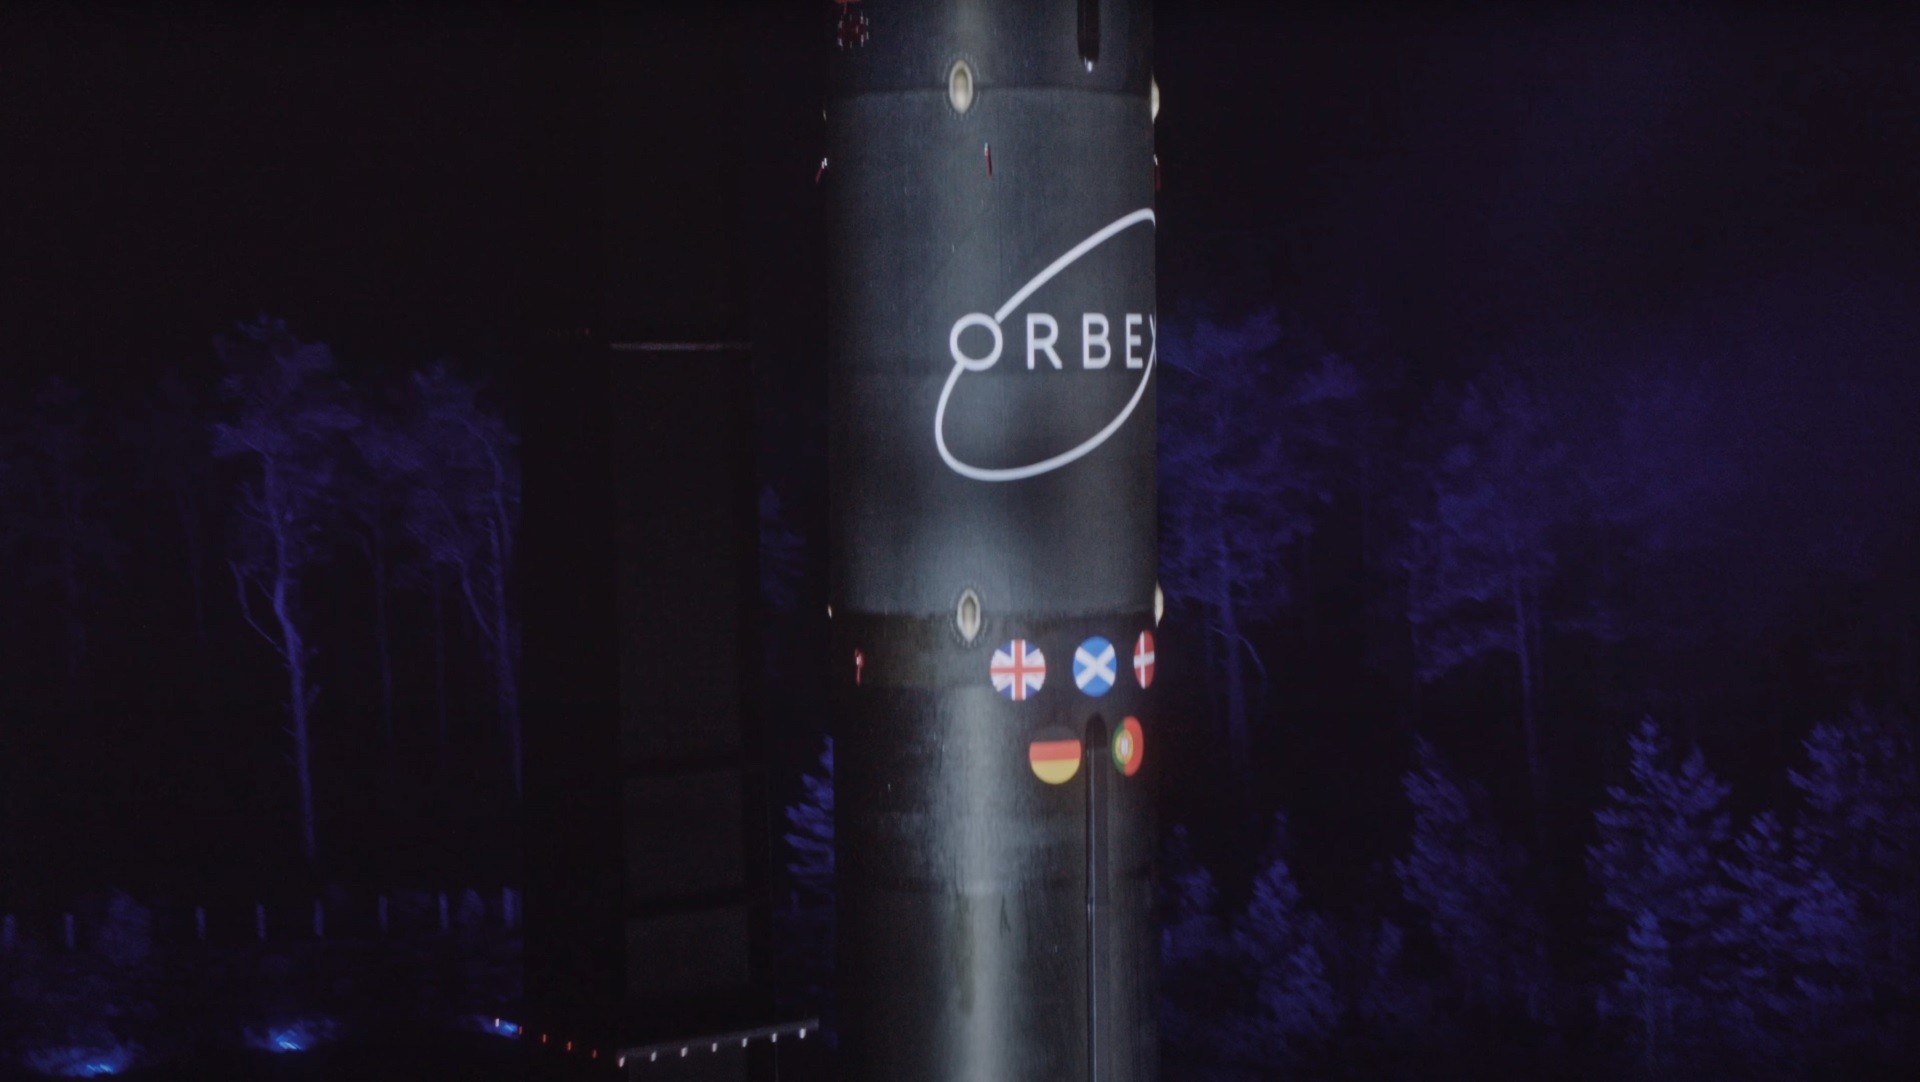 Orbex commissions 3D printer capable of producing 35+ rocket engines a year  - SpaceNews